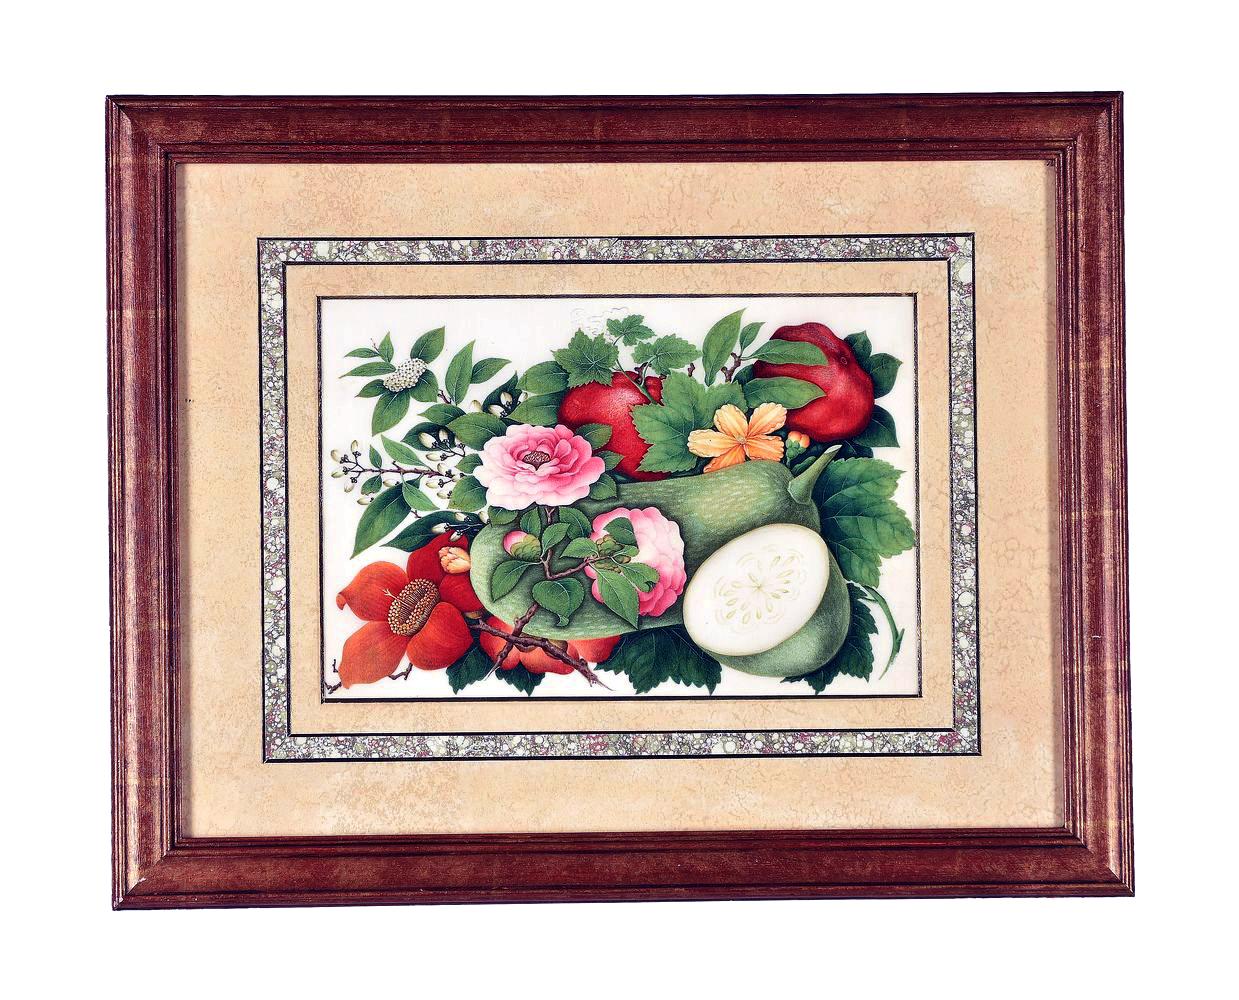 China Trade Watercolor & Gouache Set of Twelve Paintings of Fruit & Flowers In Good Condition For Sale In Downingtown, PA